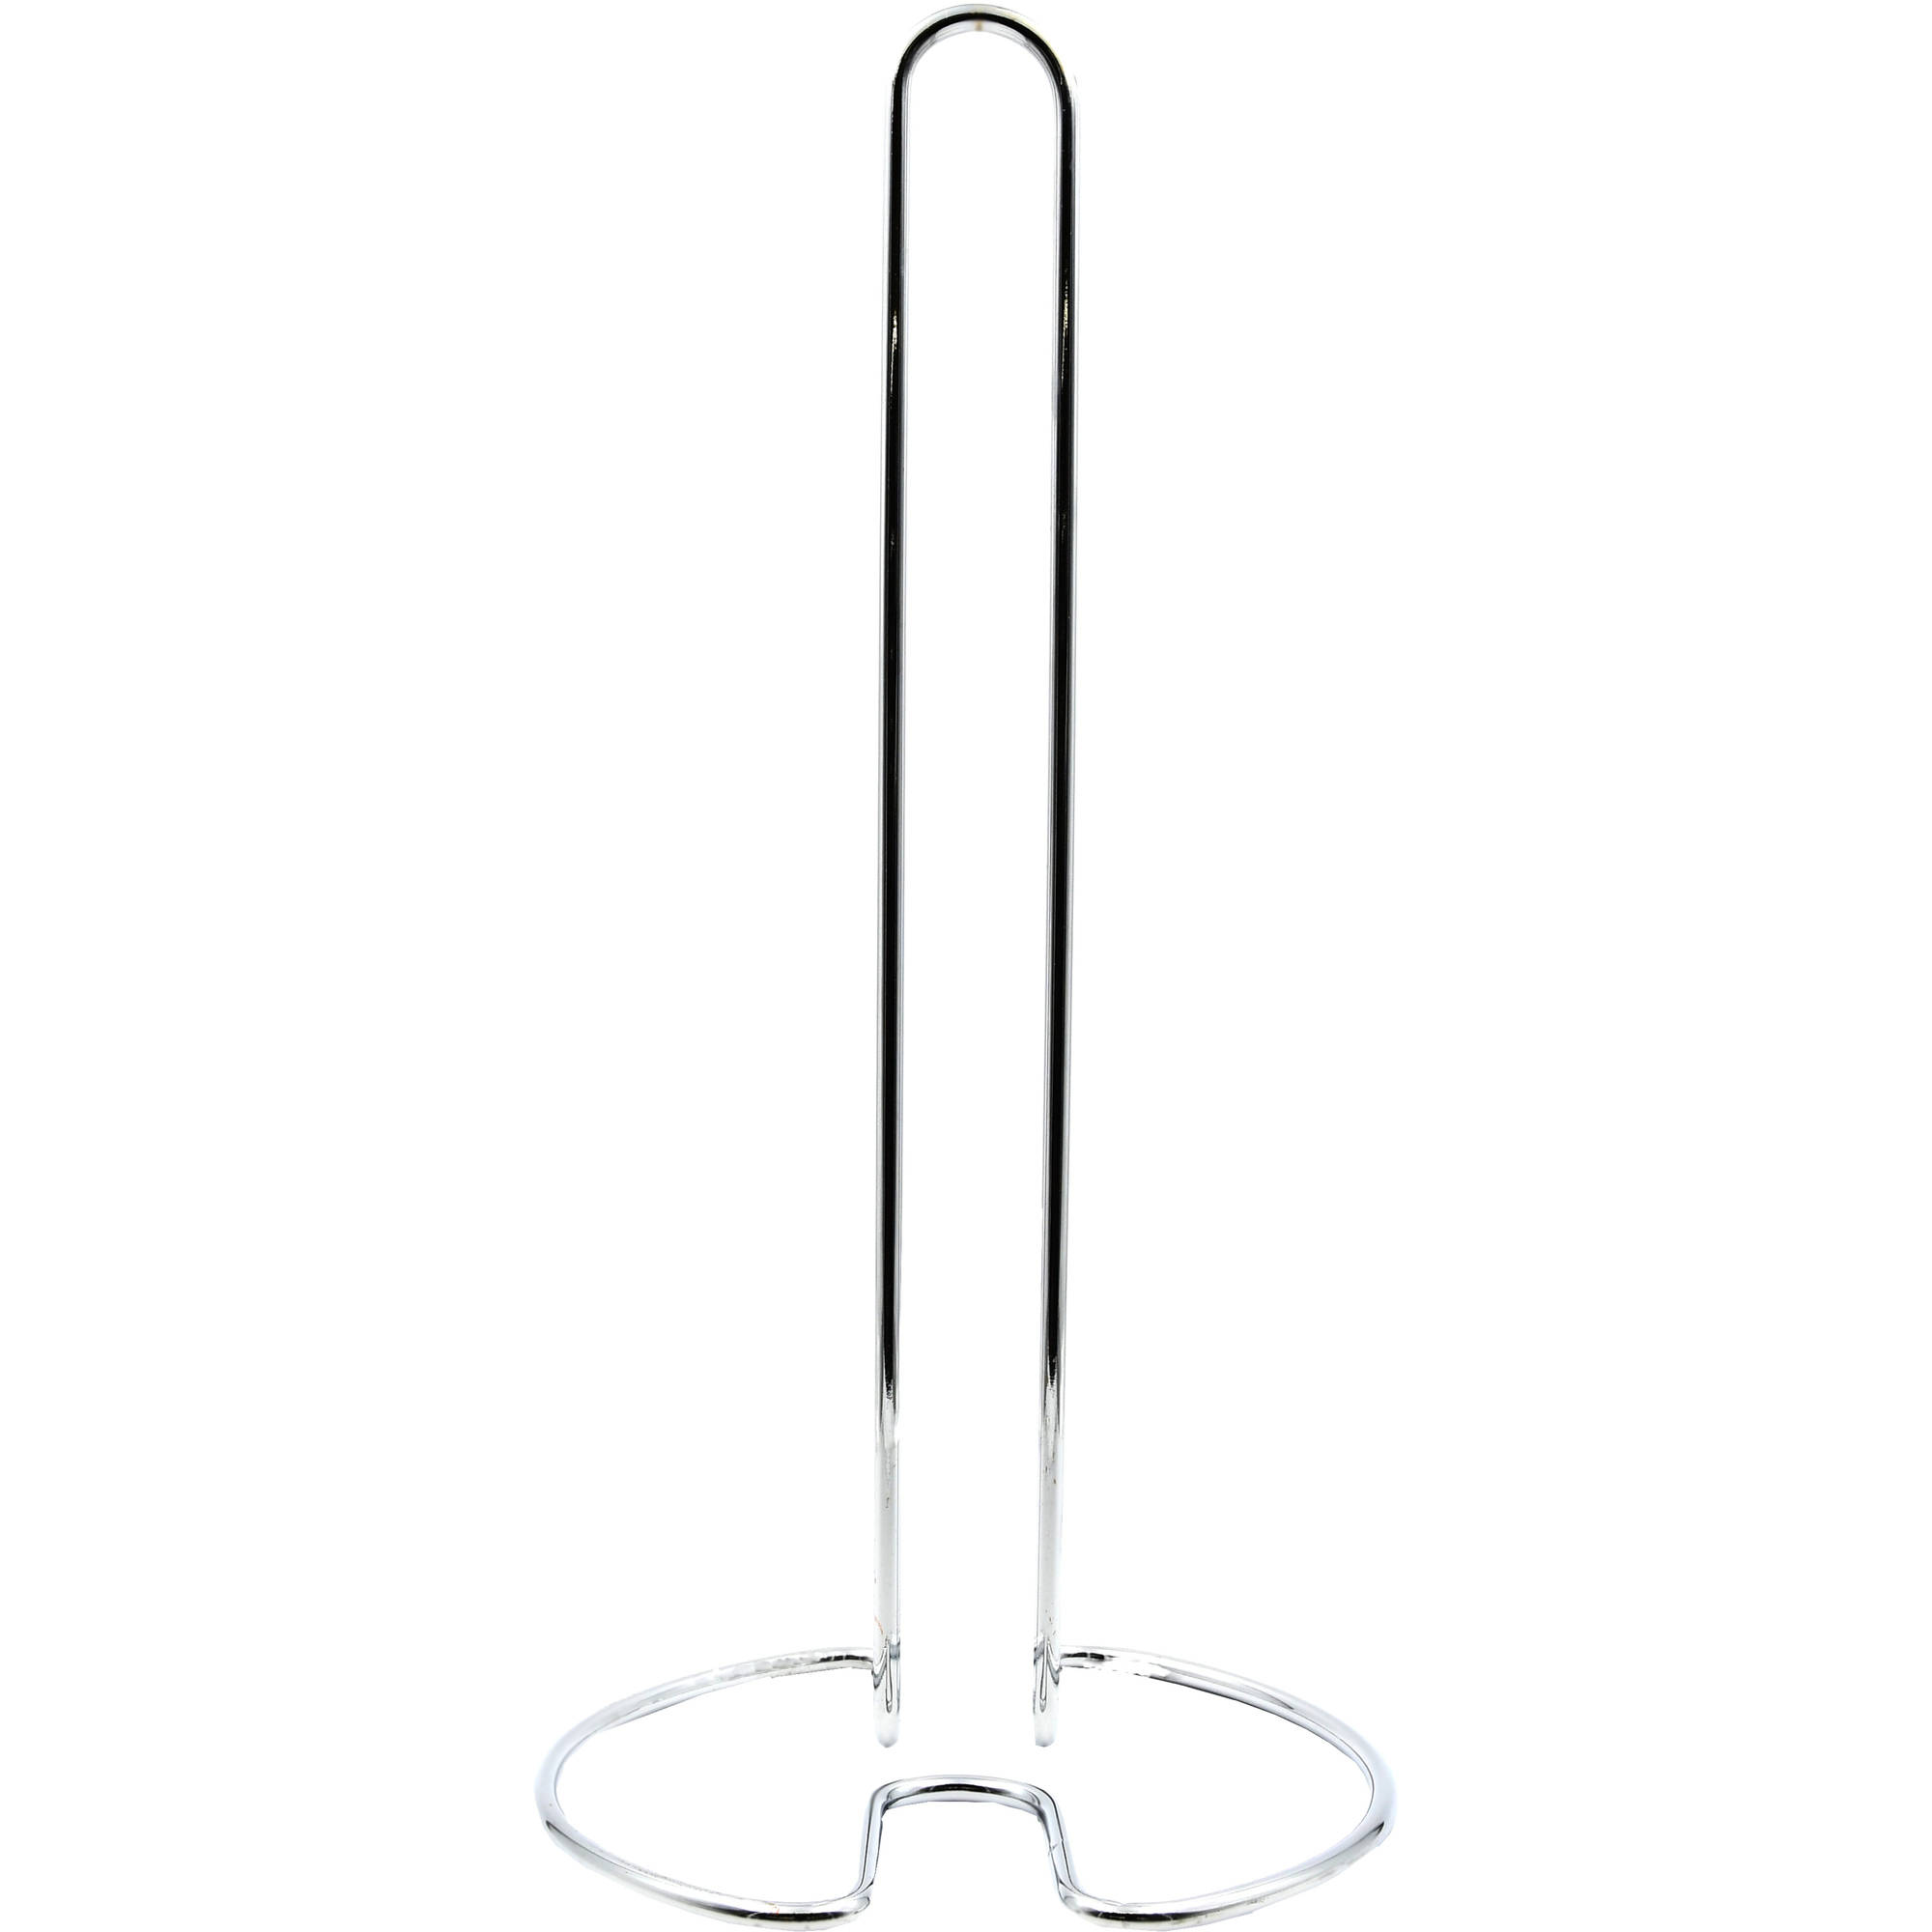 Mainstays Paper Towel Holder, Silver - image 1 of 4